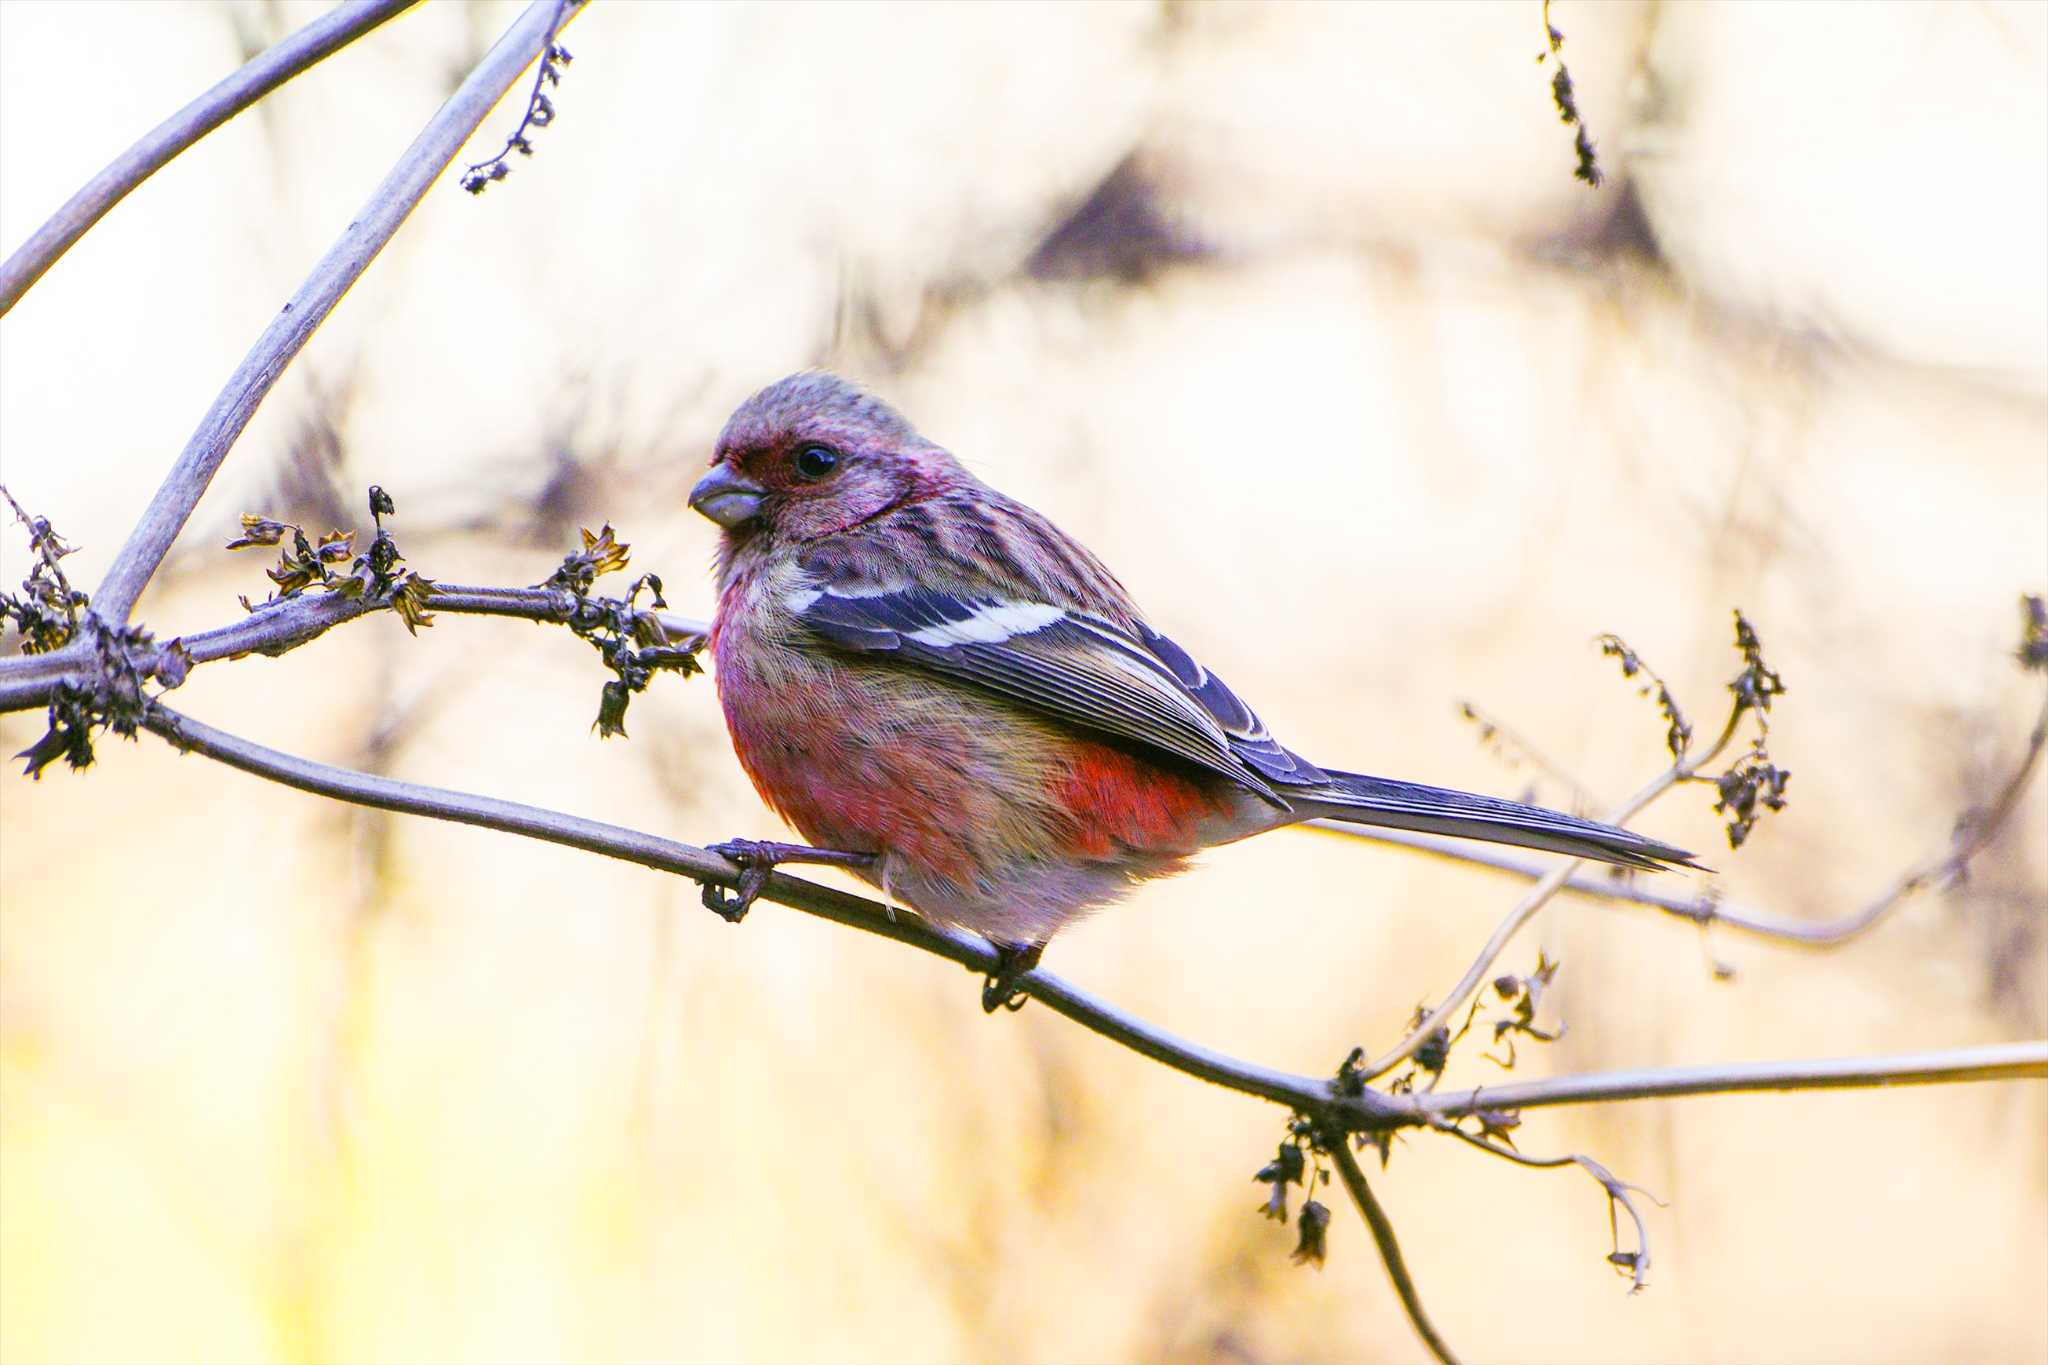 Photo of Siberian Long-tailed Rosefinch at Hayatogawa Forest Road by BW11558